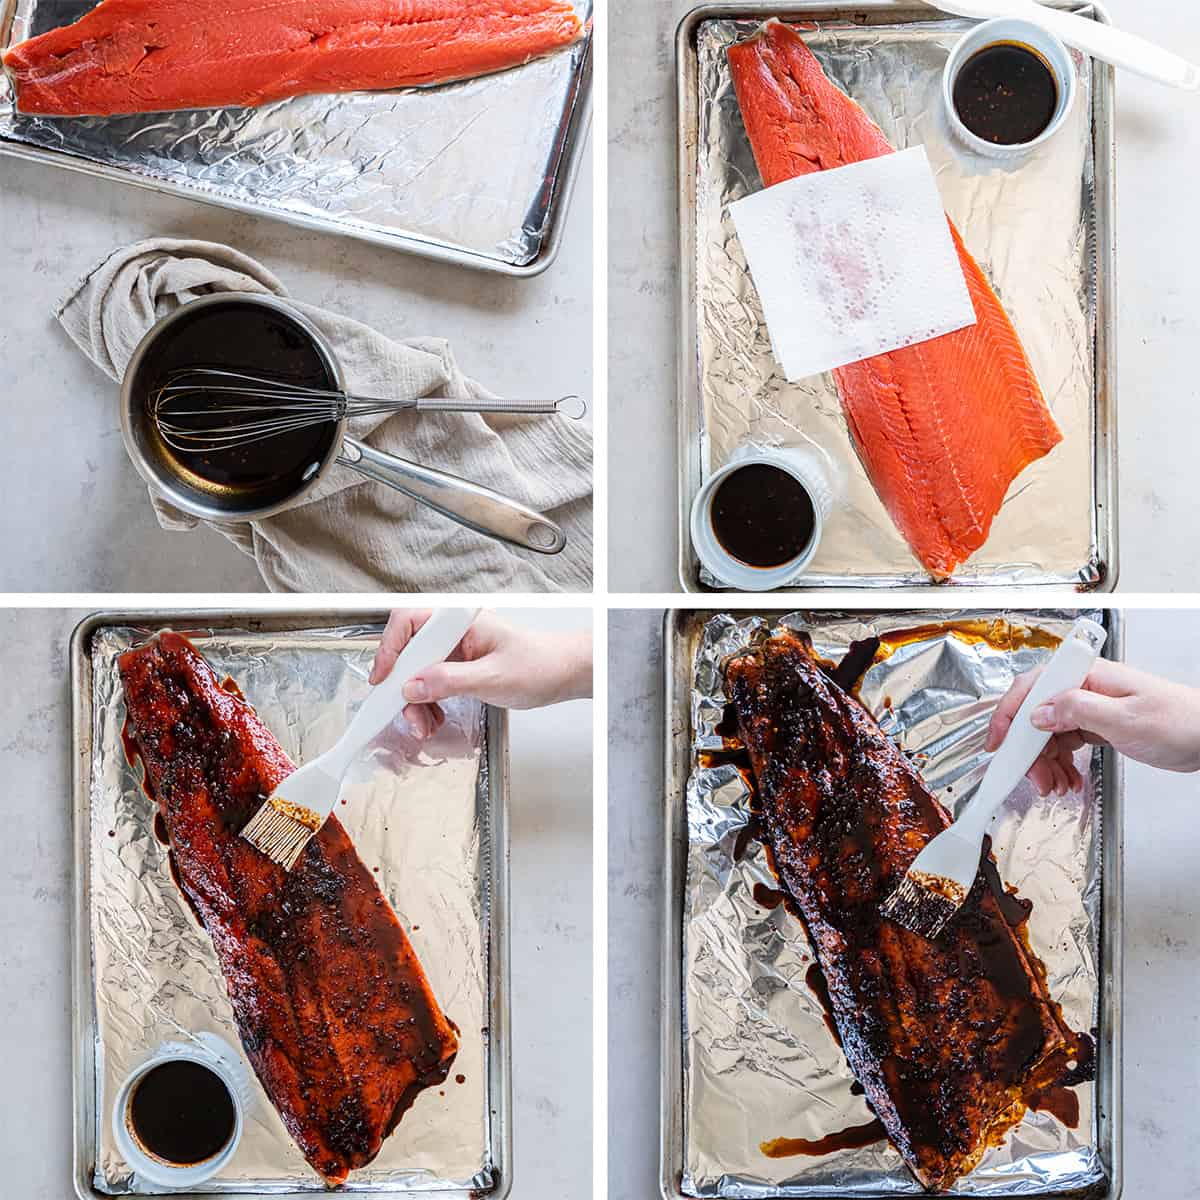 Four images of glaze in saucepan and being spread on a sockeye salmon fillet with a pastry brush.